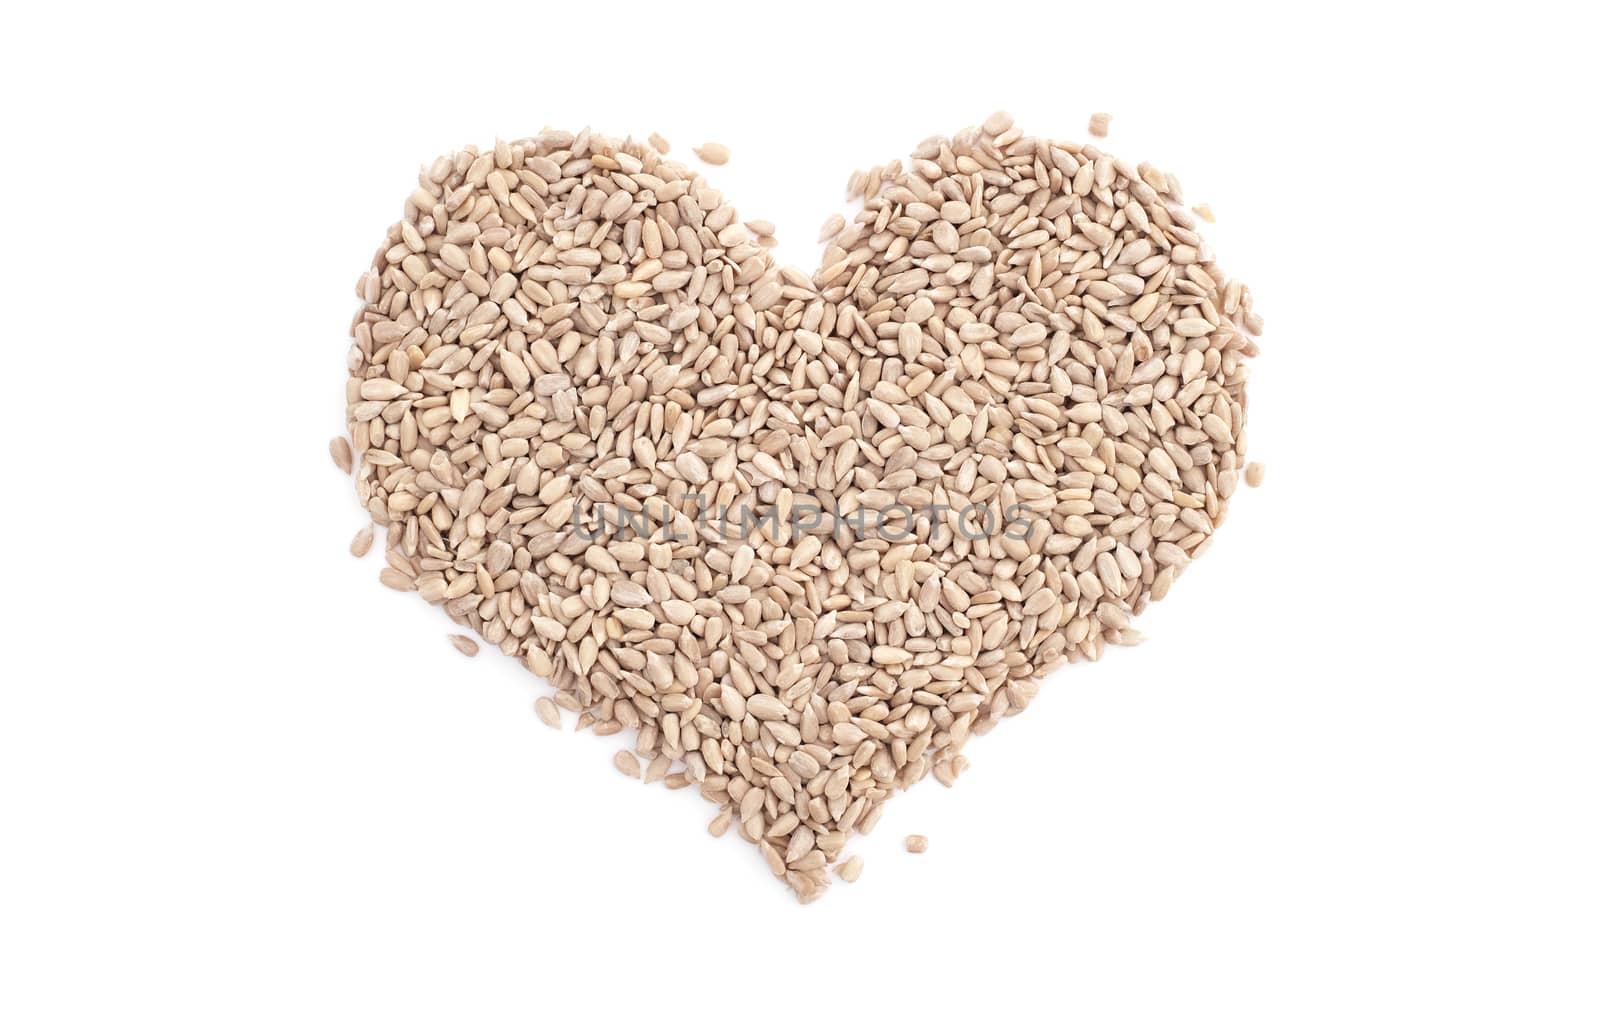 Sunflower hearts in a heart shape, isolated on a white background